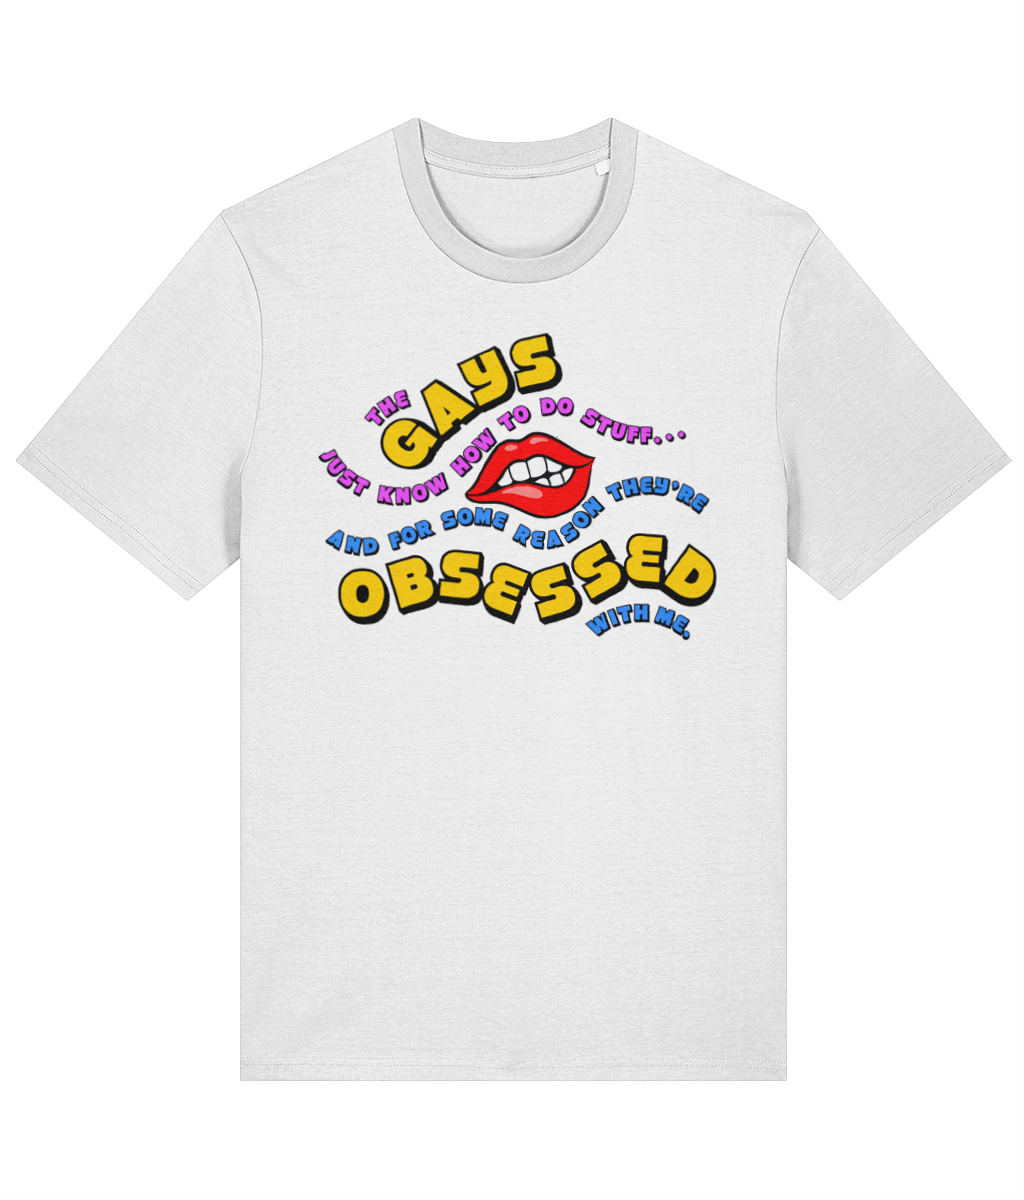 The Gays They're Obsessed With Me T-Shirt